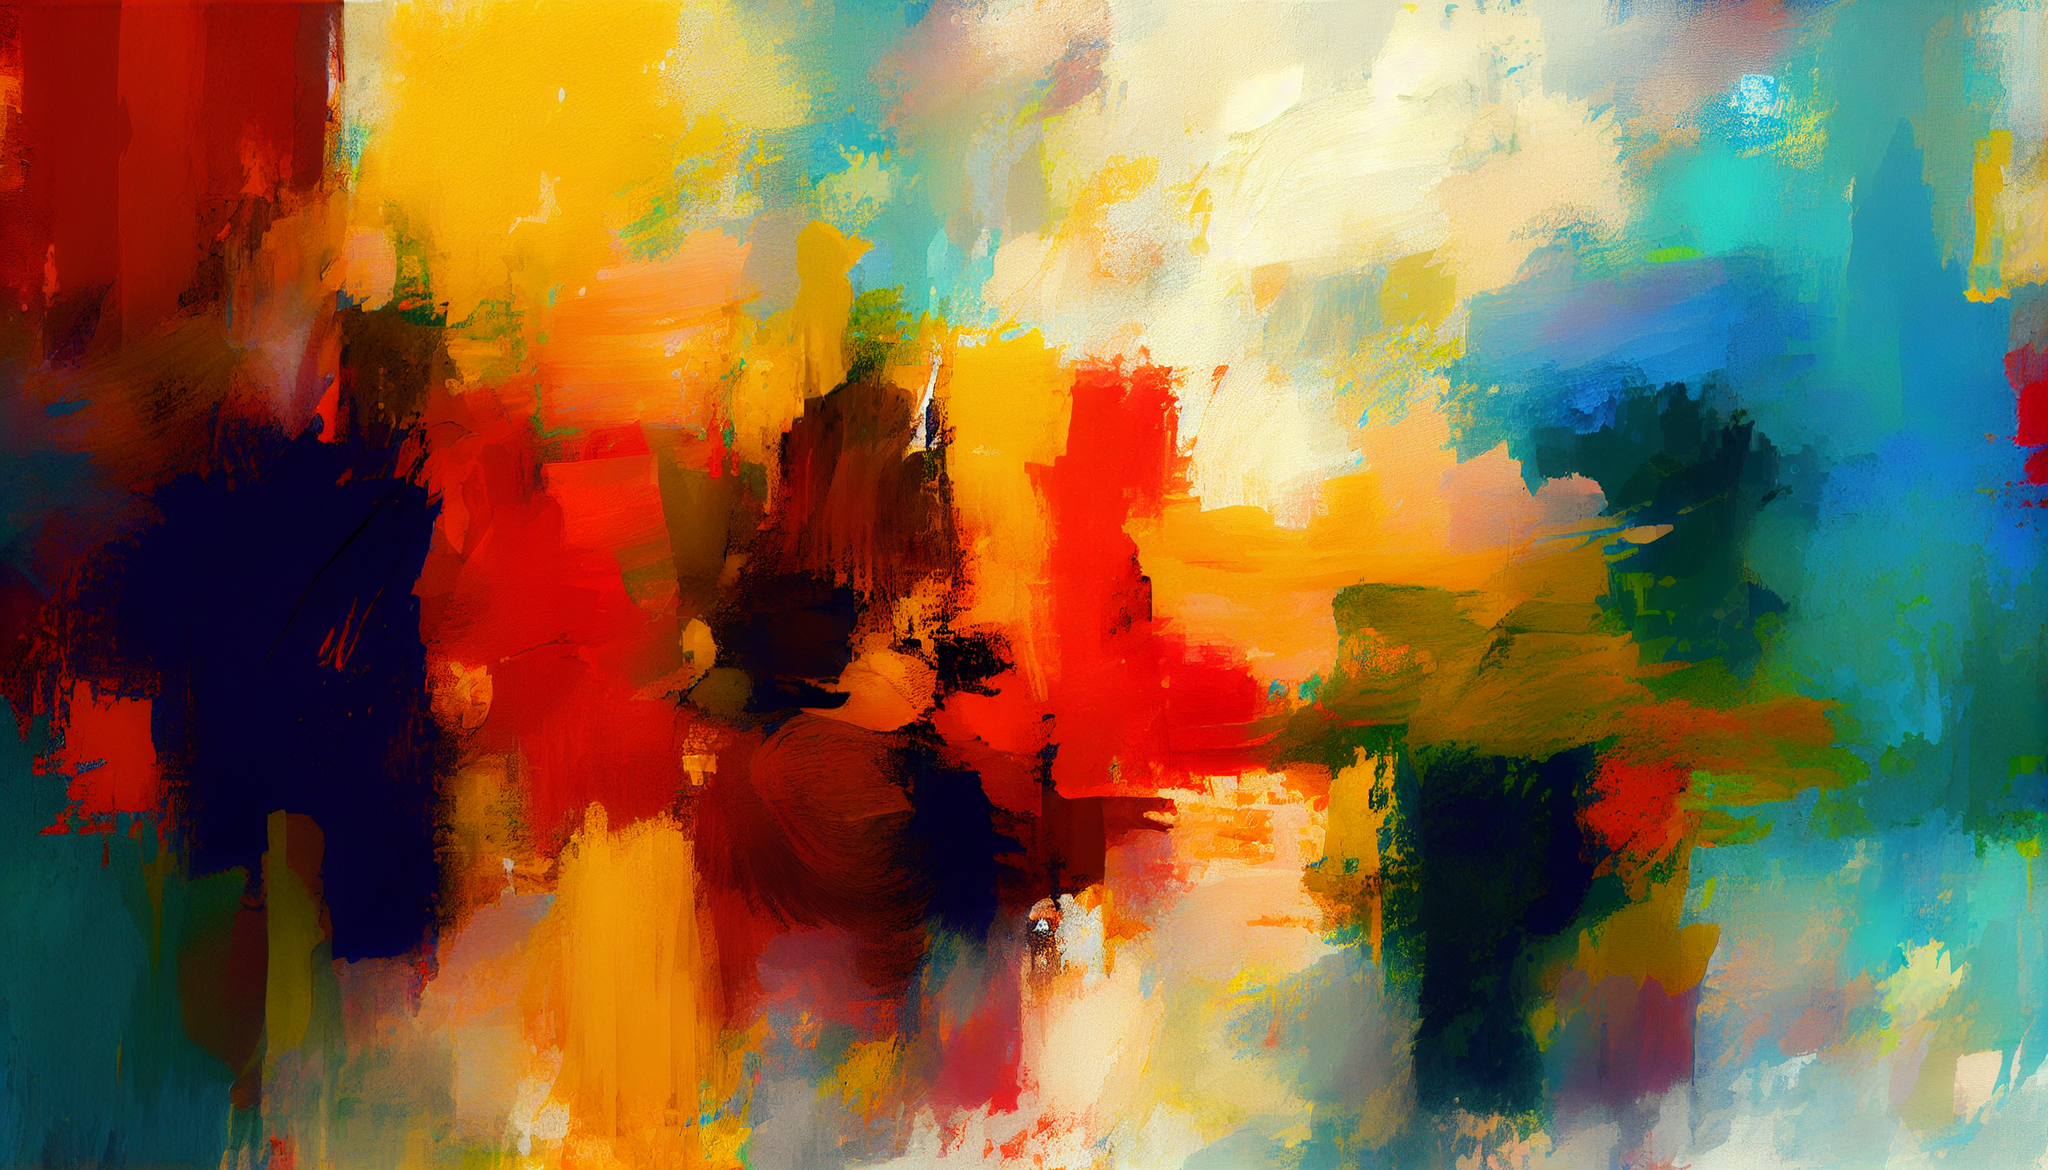 Vibrant Expressions: An Abstract Impressionist Canvas Textured Painting Print in Acrylic Colors and Bold Brush Strokes